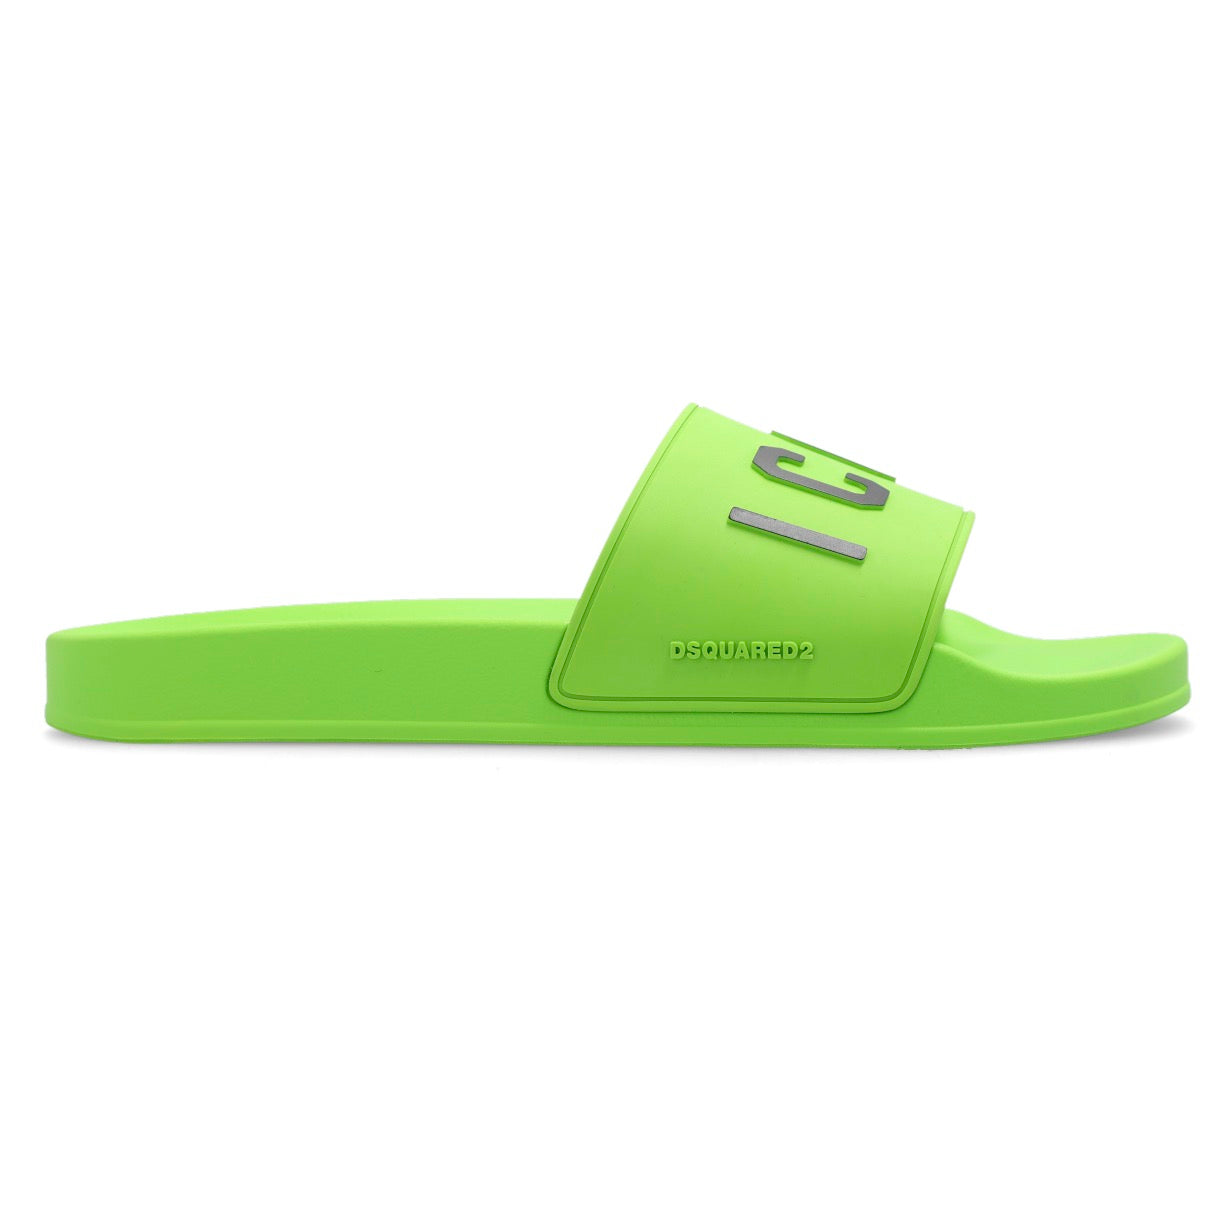 Step into luxury with these DSQUARED2 Icon Slides. The front features bold "ICON" lettering, while the sides boast 3D "DSQUARED2" lettering for a fashionable touch. 